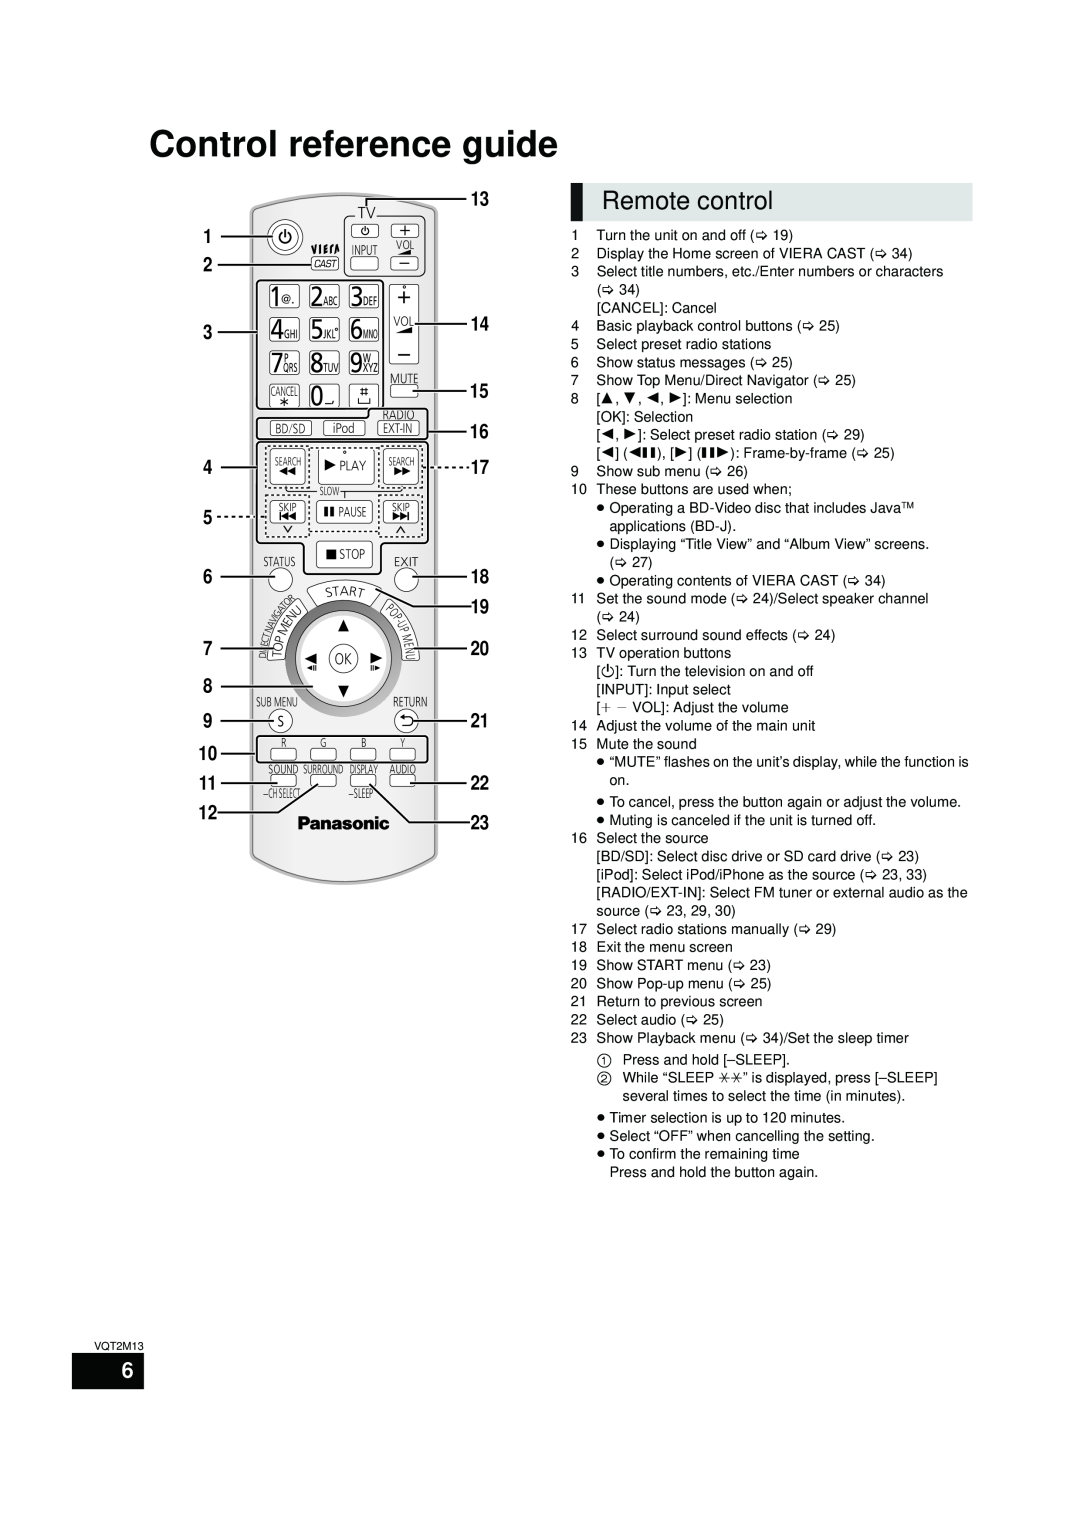 Panasonic SC-BT730, SC-BT330 operating instructions Control reference guide, Remote control, 1 2 3 4 5 